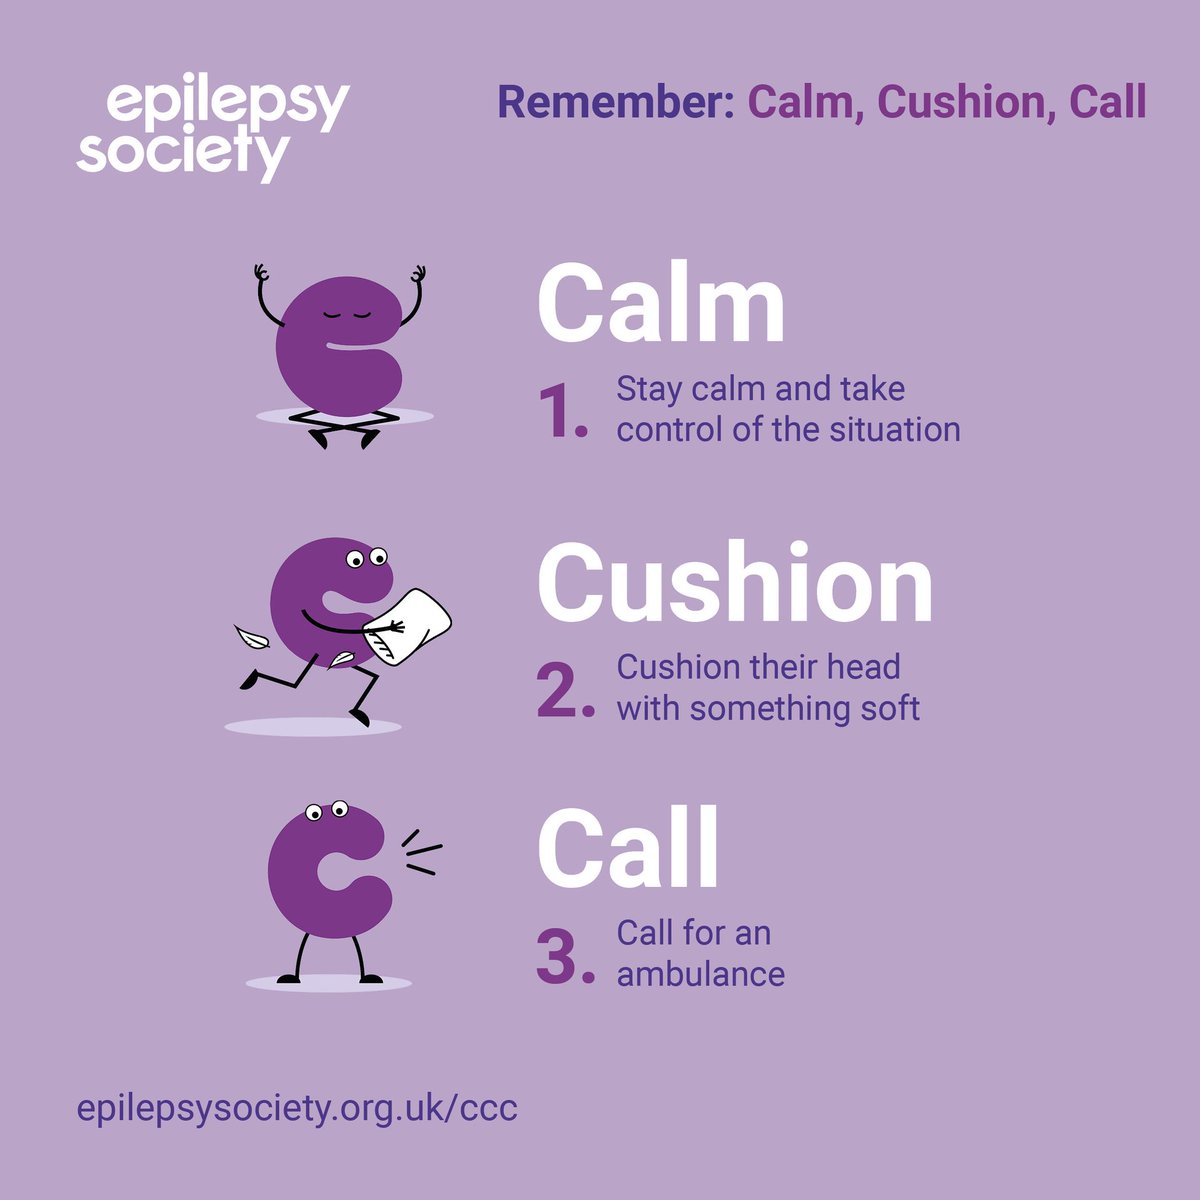 If you see someone having a tonic clonic seizure, remember: Stay CALM CUSHION their head CALL for help Our aim is to make sure everyone knows how to support someone with #epilepsy 💜 For more info: bit.ly/3xCVIYX